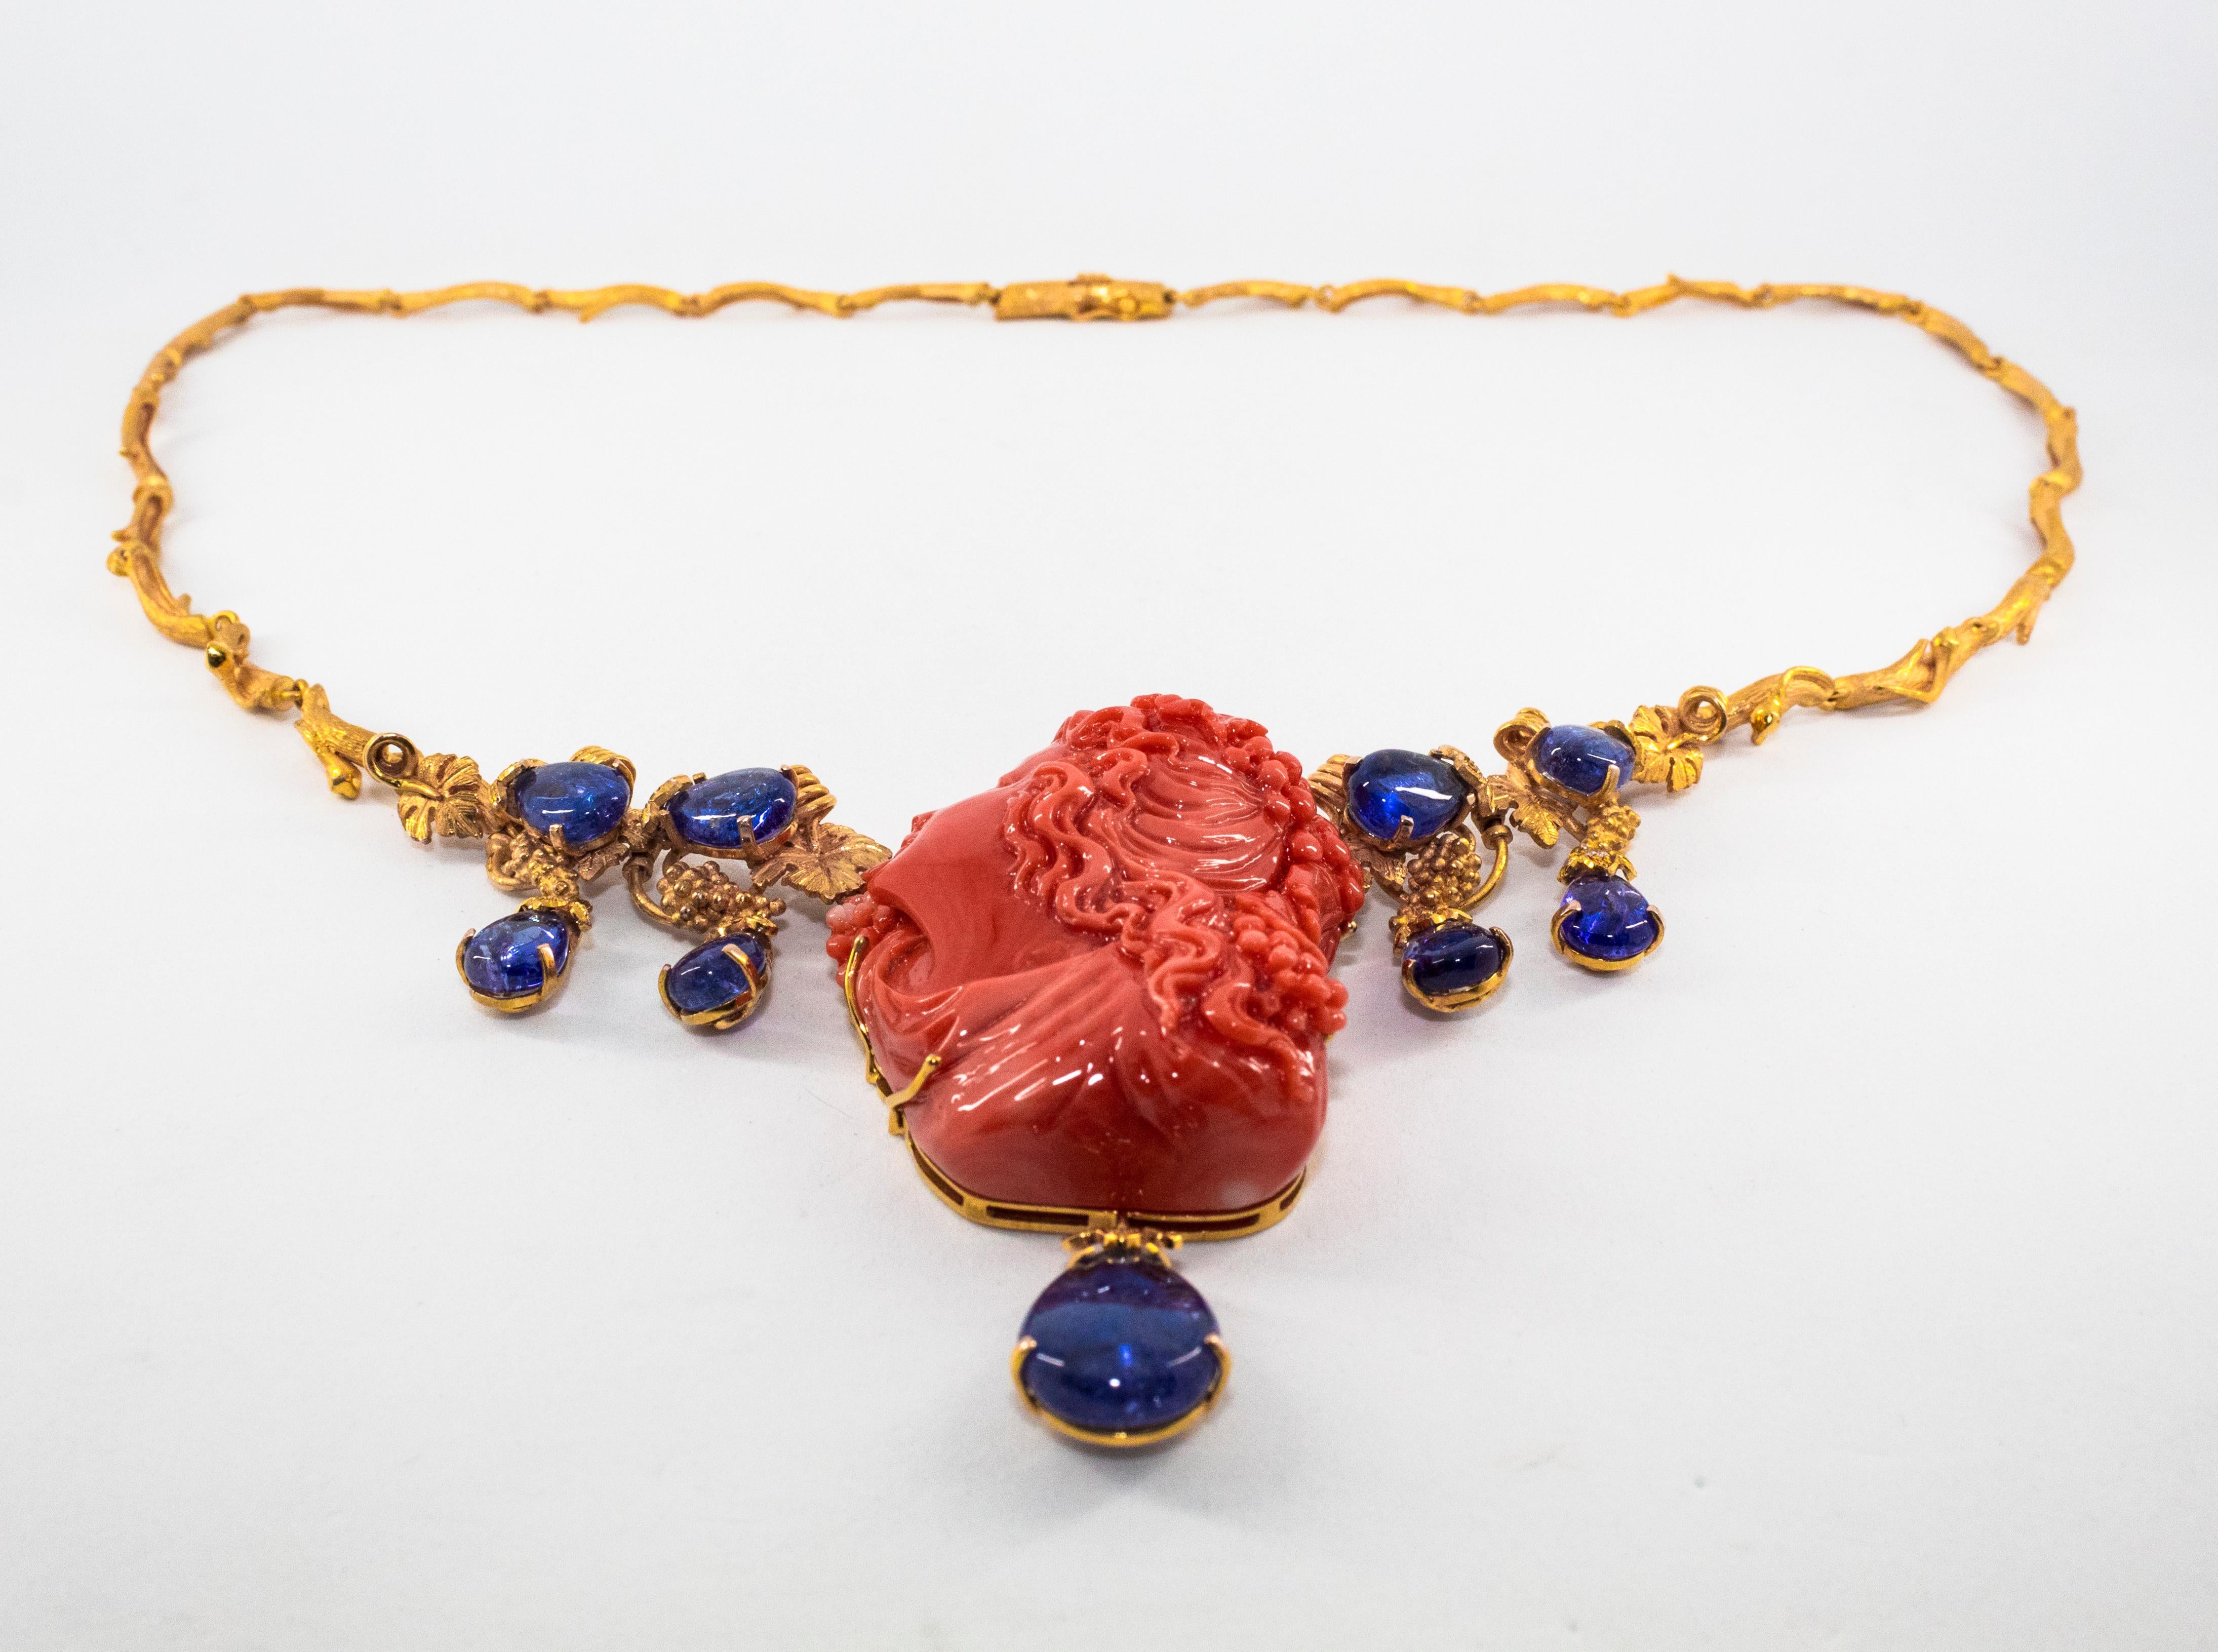 This Necklace is made of 14K Yellow Gold.
This Necklace has 0.33 Carats of White Diamonds.
This Necklace has 31.60 Carats of Tanzanite.
This Necklace has Red Mediterranean (Sardinia, Italy) Carved Coral.
The Girl made of Red Coral is Arianna, wife